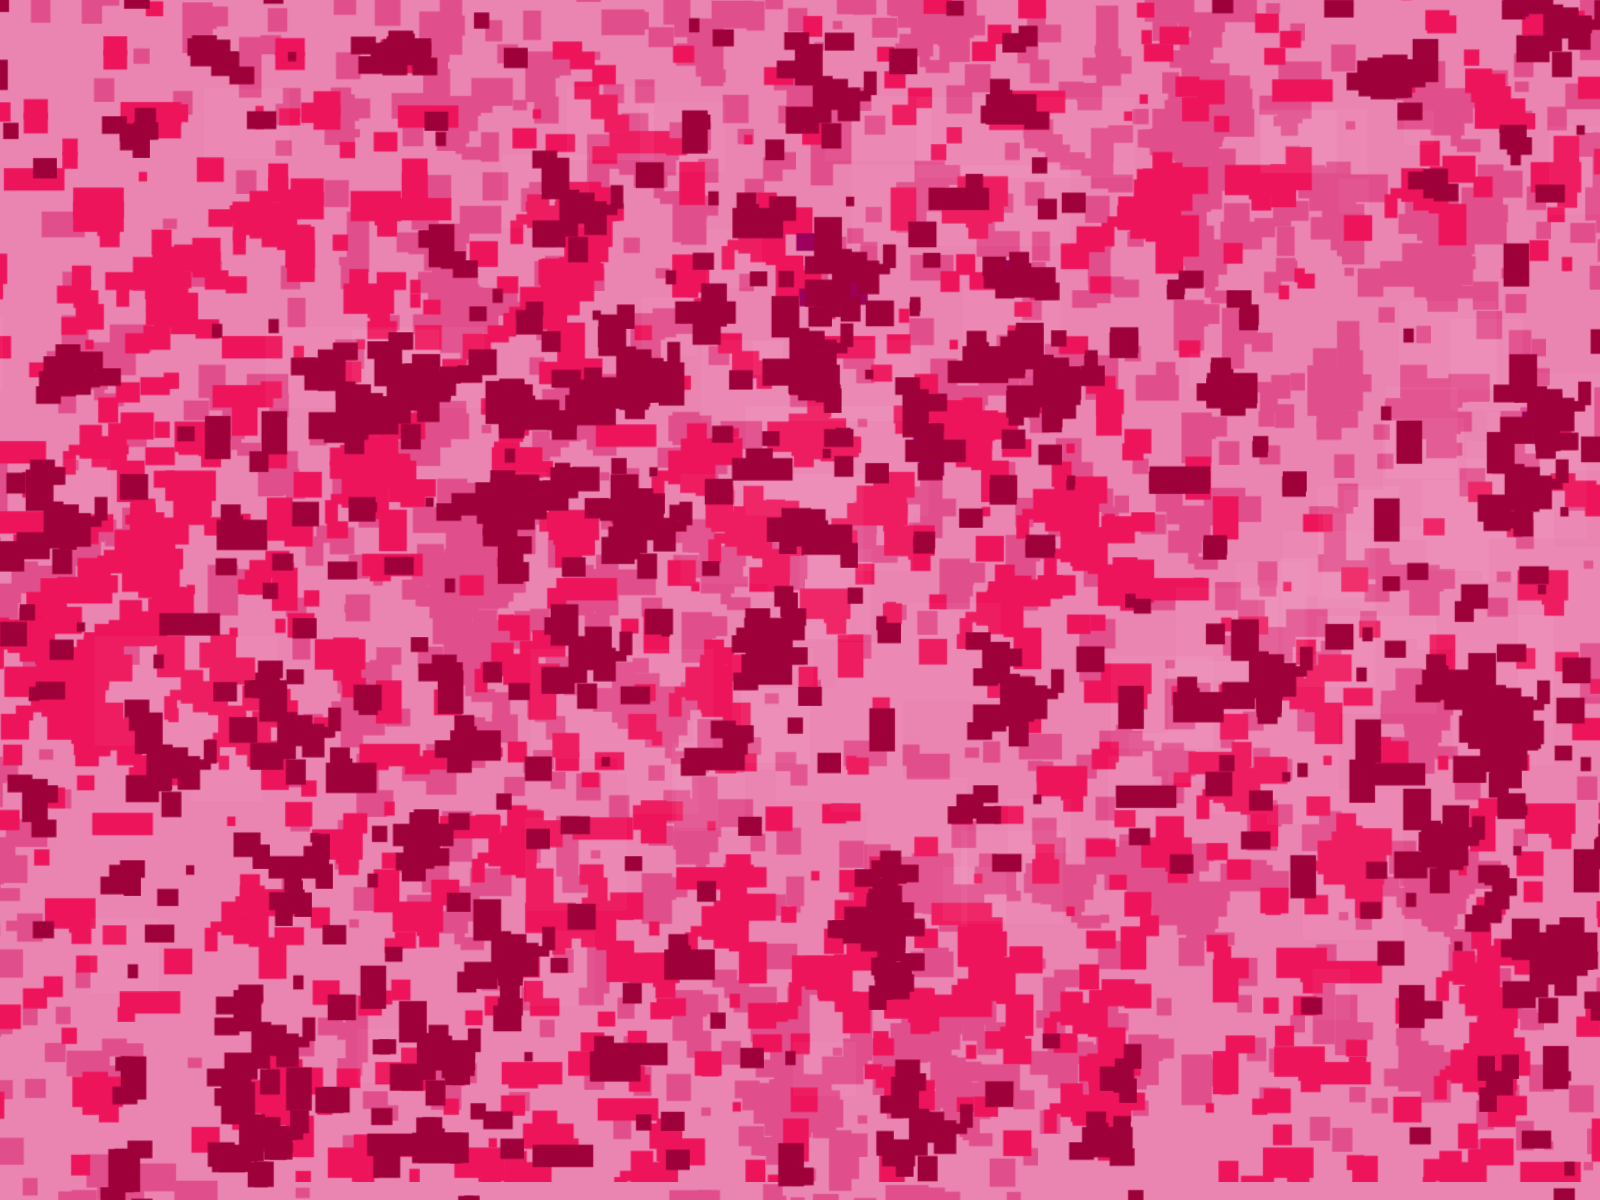 hot_pink_camo_by_darkiller45-d2ytc6i.png (1600×1200)